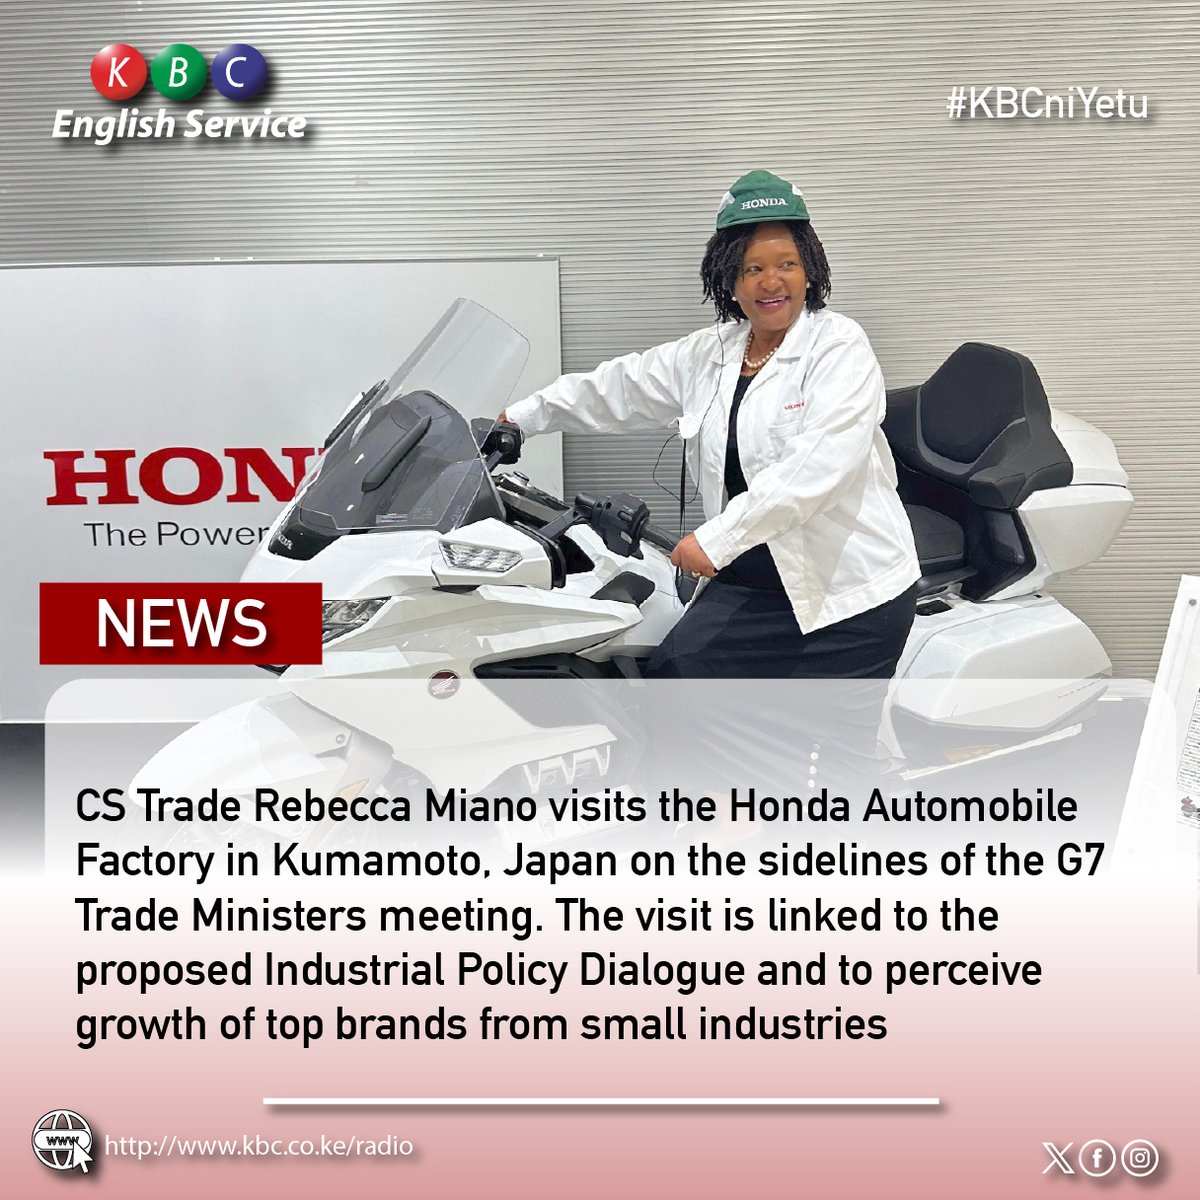 CS Trade Rebecca Miano visits the Honda Automobile Factory in Kumamoto, Japan on the sidelines of the G7 Trade Ministers meeting. The visit is linked to the proposed Industrial Policy Dialogue and to perceive growth of top brands from small industries ^PMN #KBCEnglishService